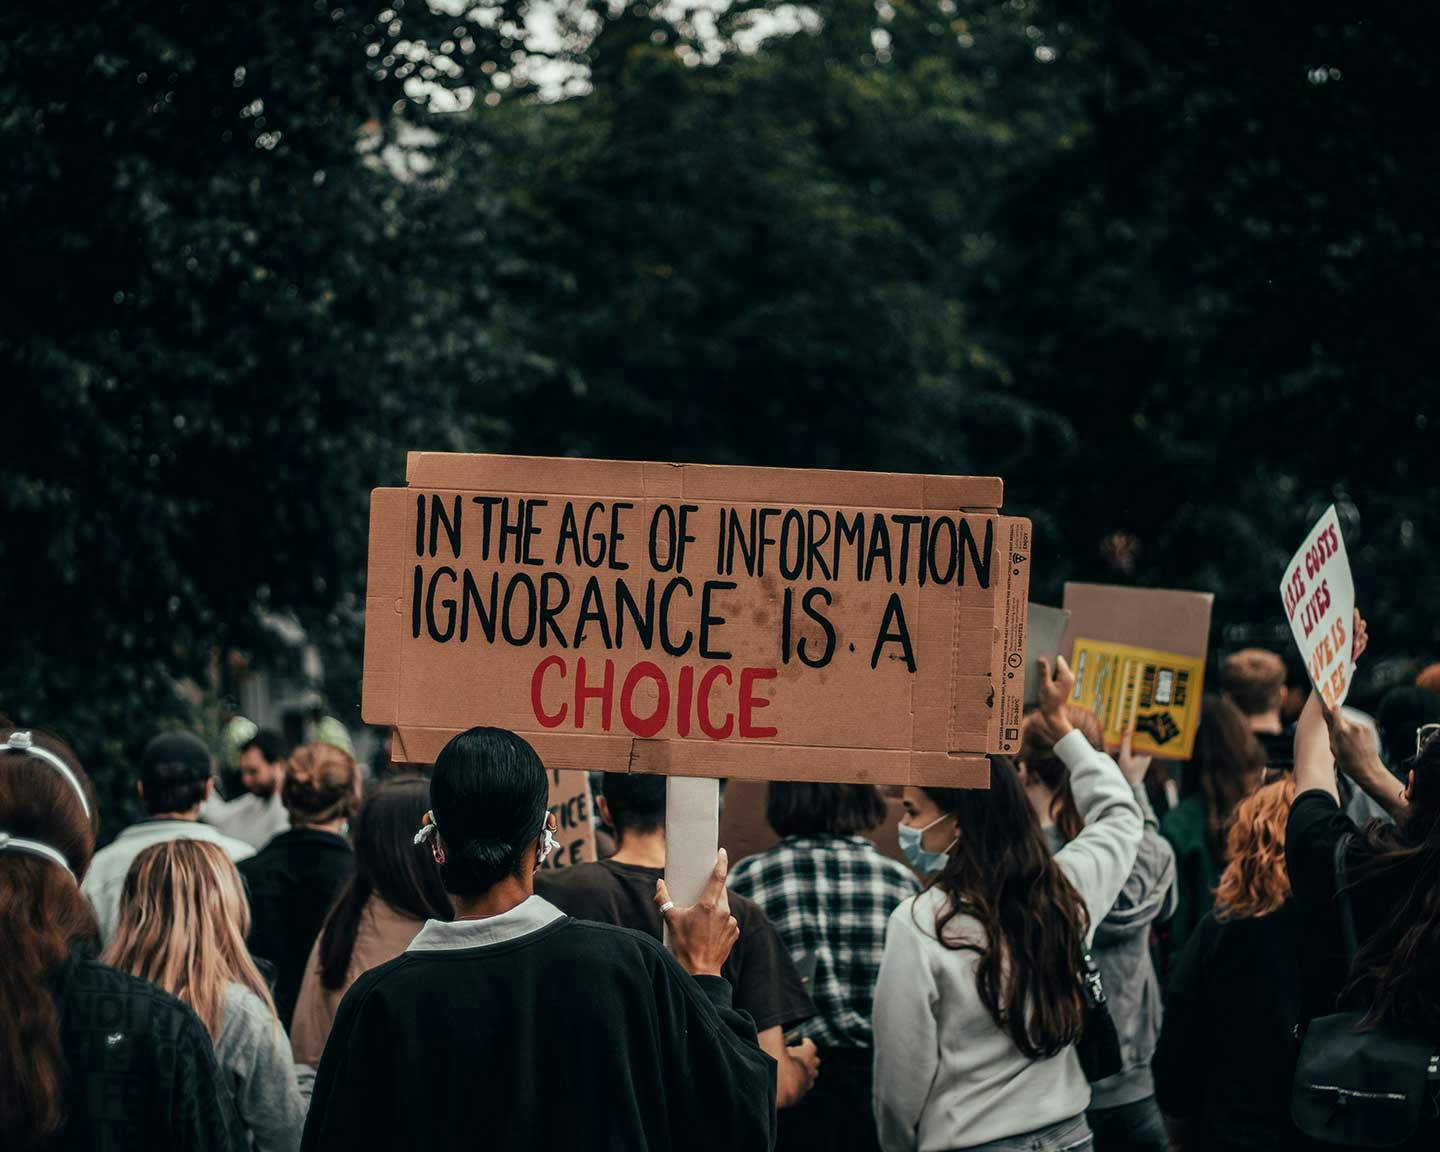 Protester holding a sign that says "In the Age of Information, Ignorance is a Choice"